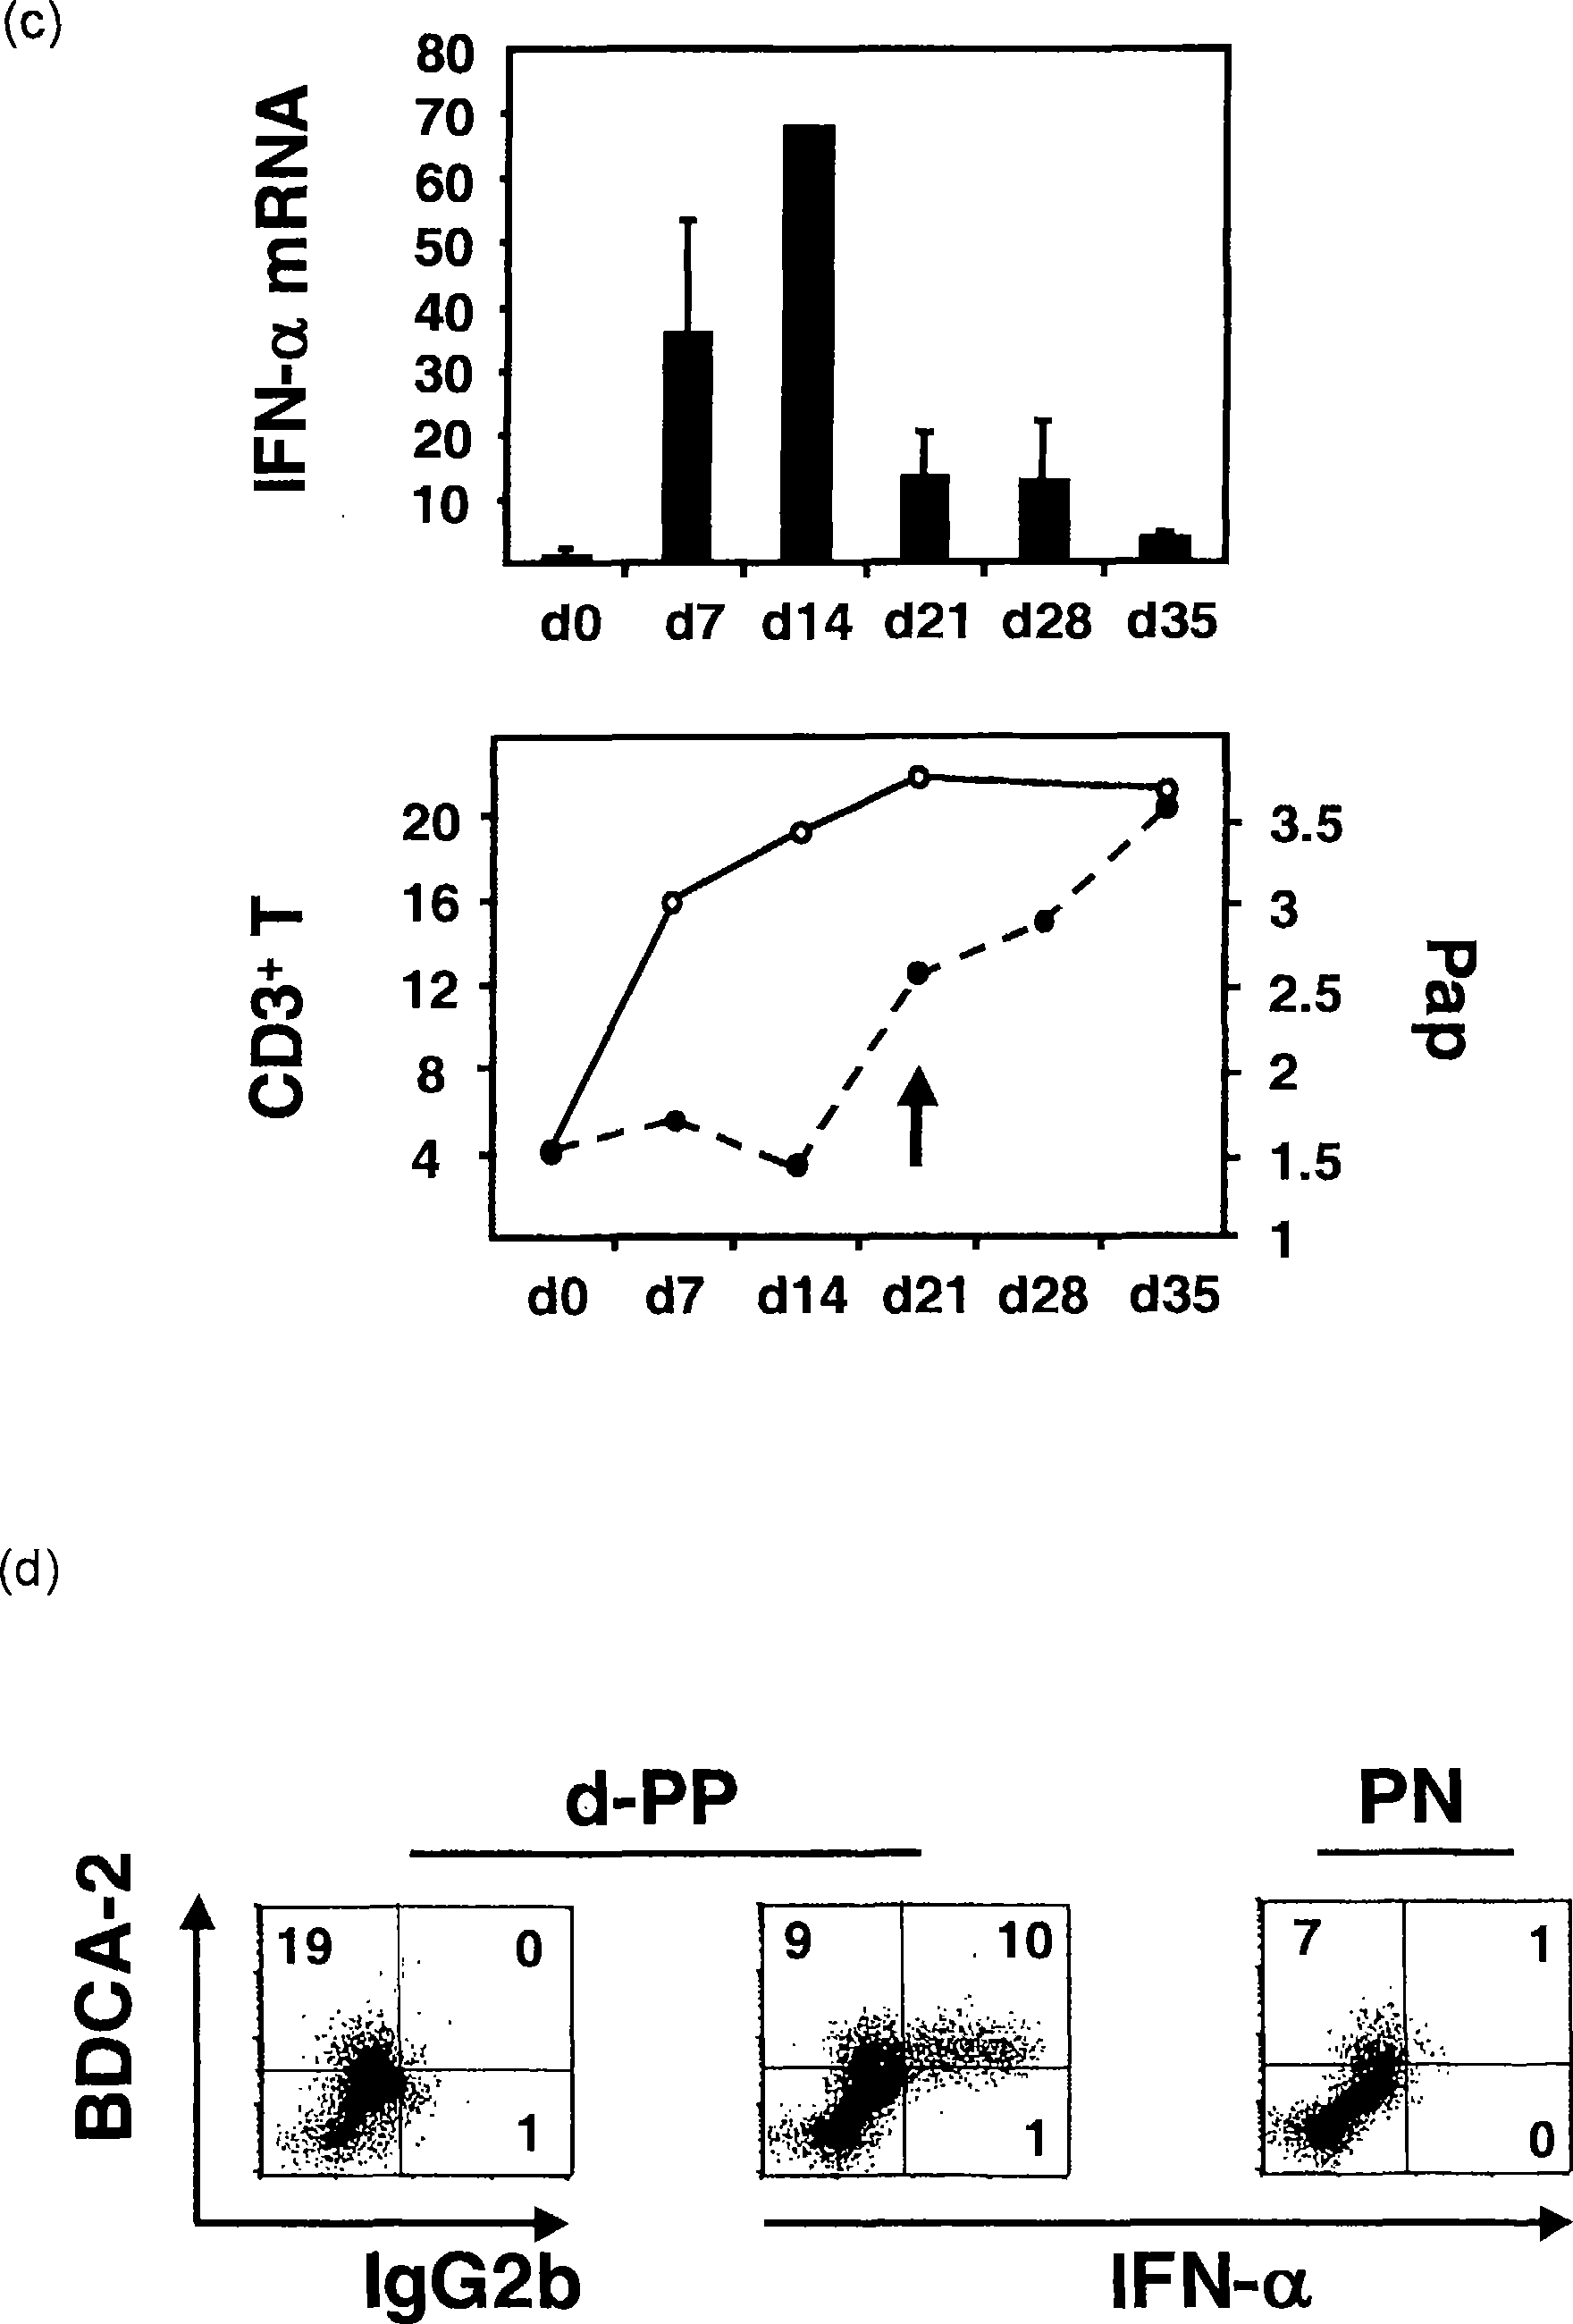 Type i interferon blocking agents for prevention and treatment of psoriasis